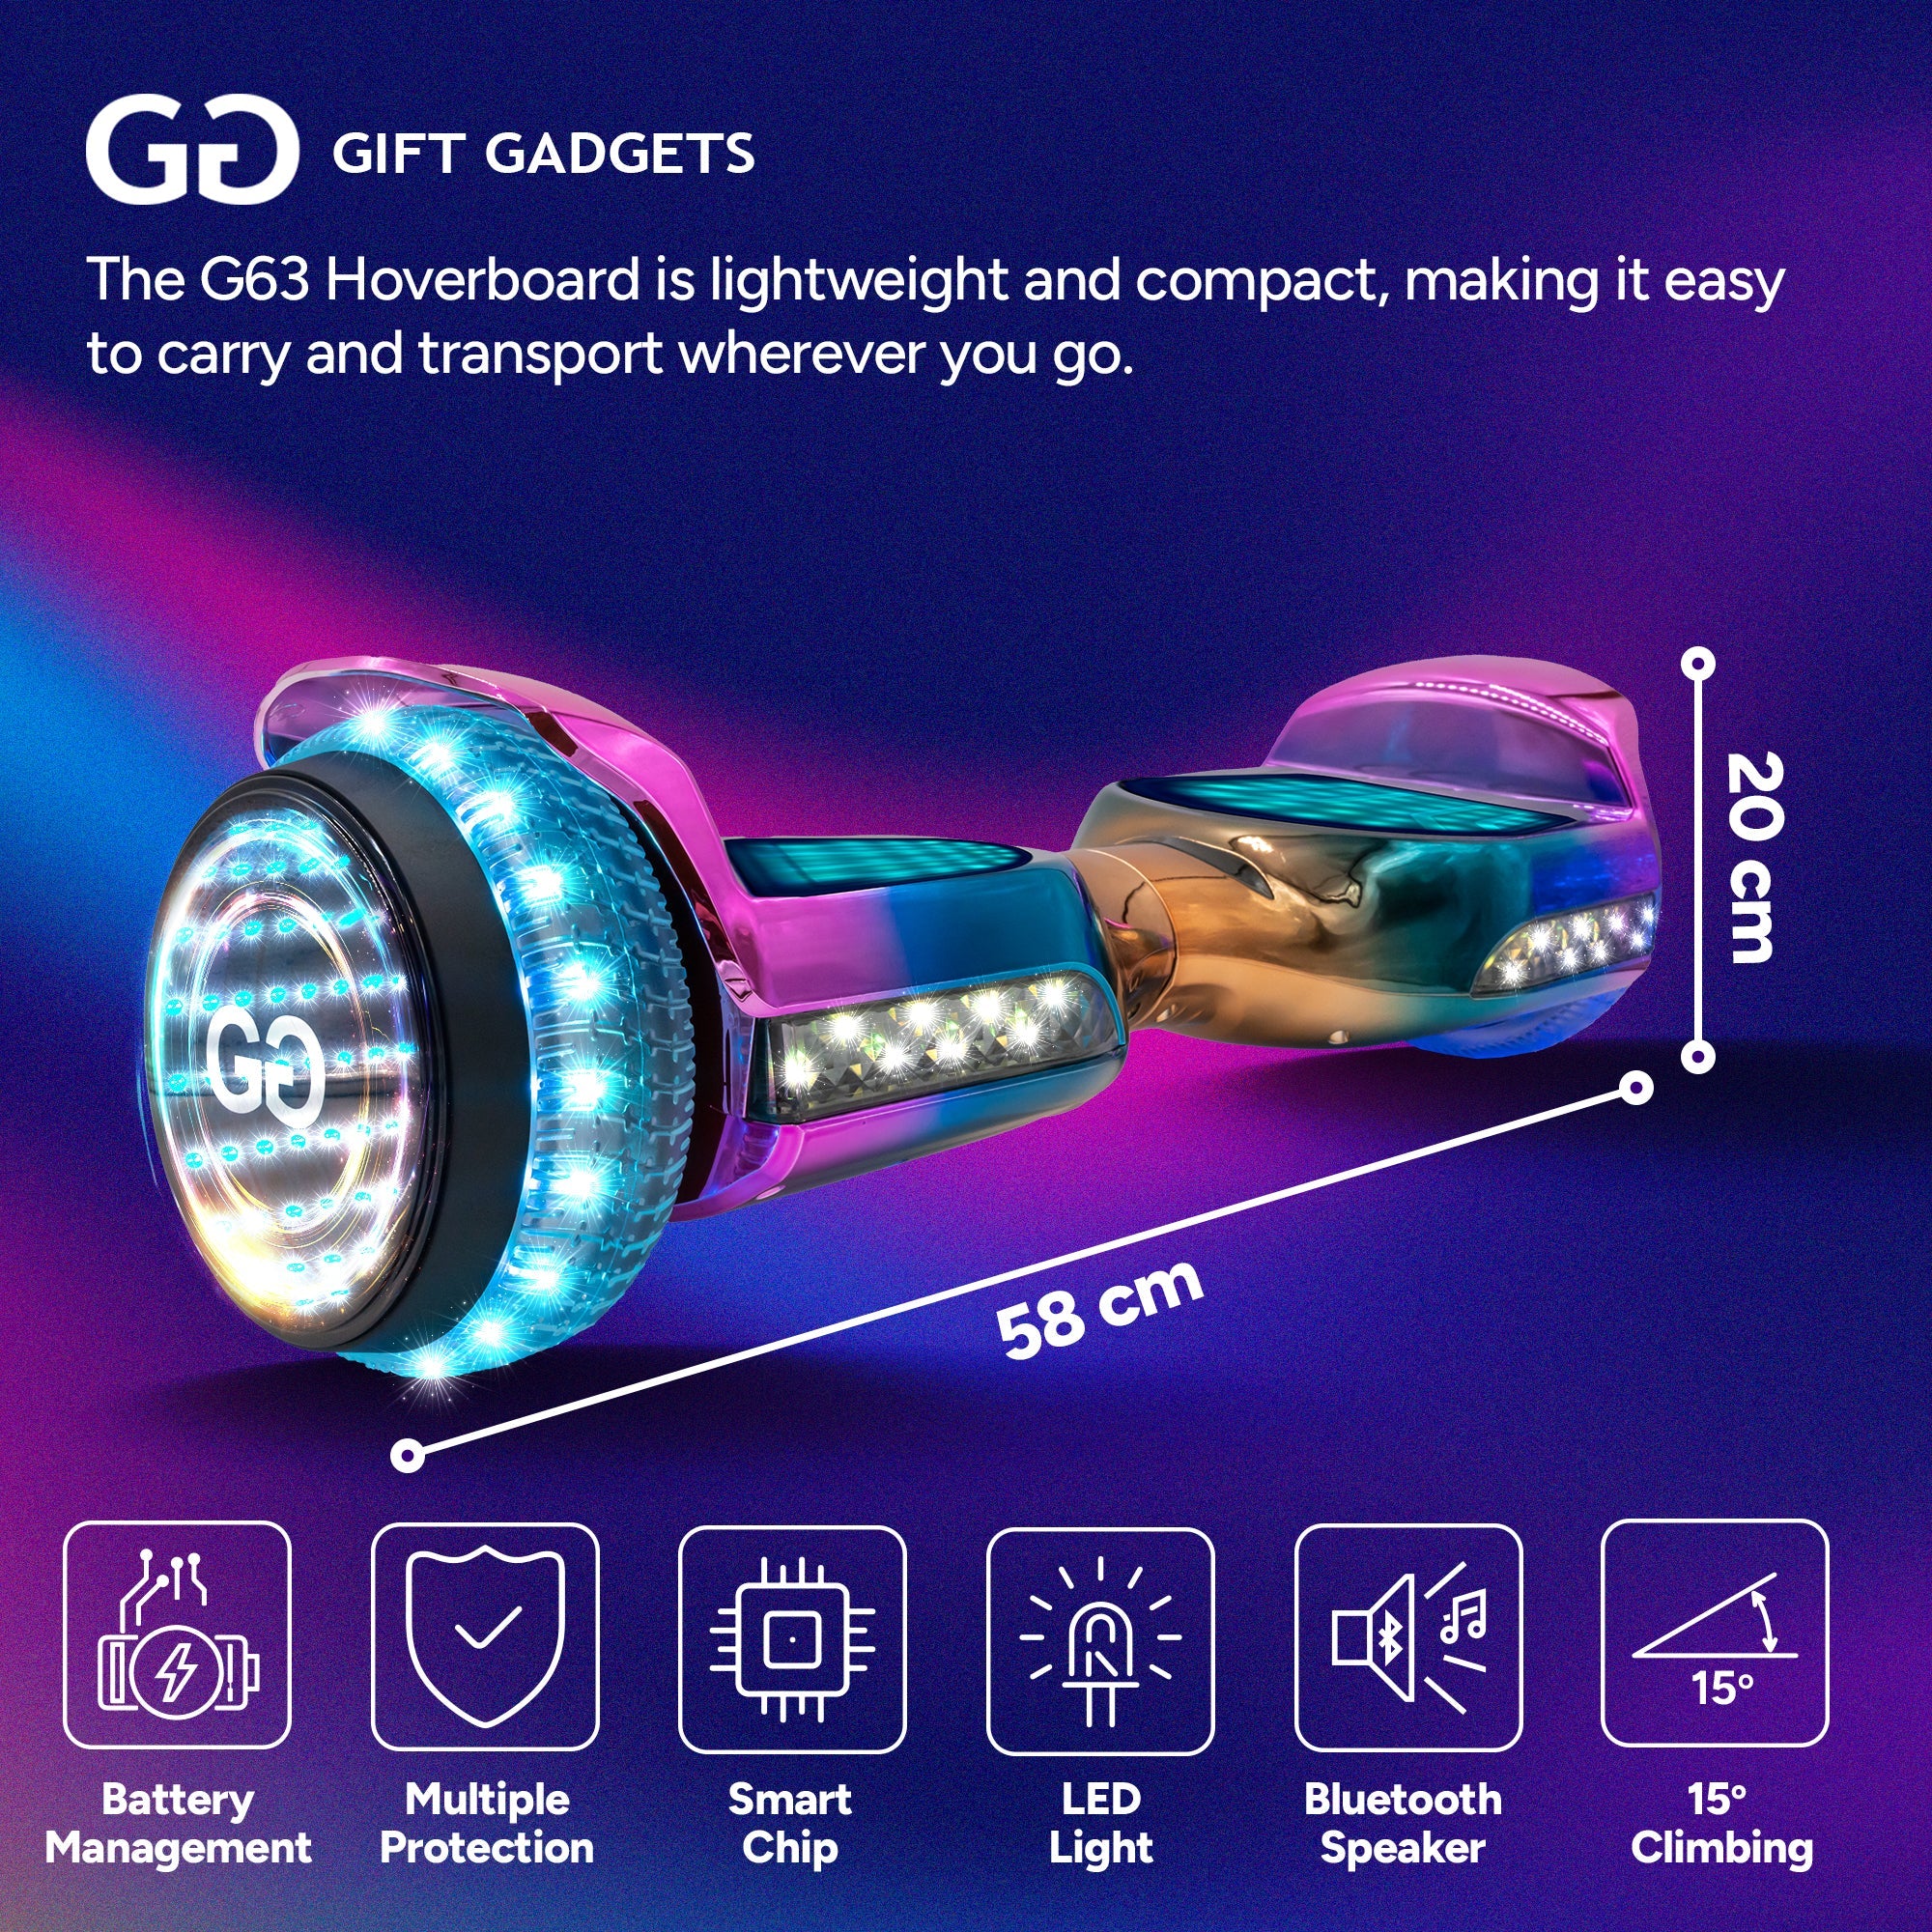 G63 Hoverboard featuring smart chip, LED lights, and Bluetooth, compact and lightweight for easy UK transport